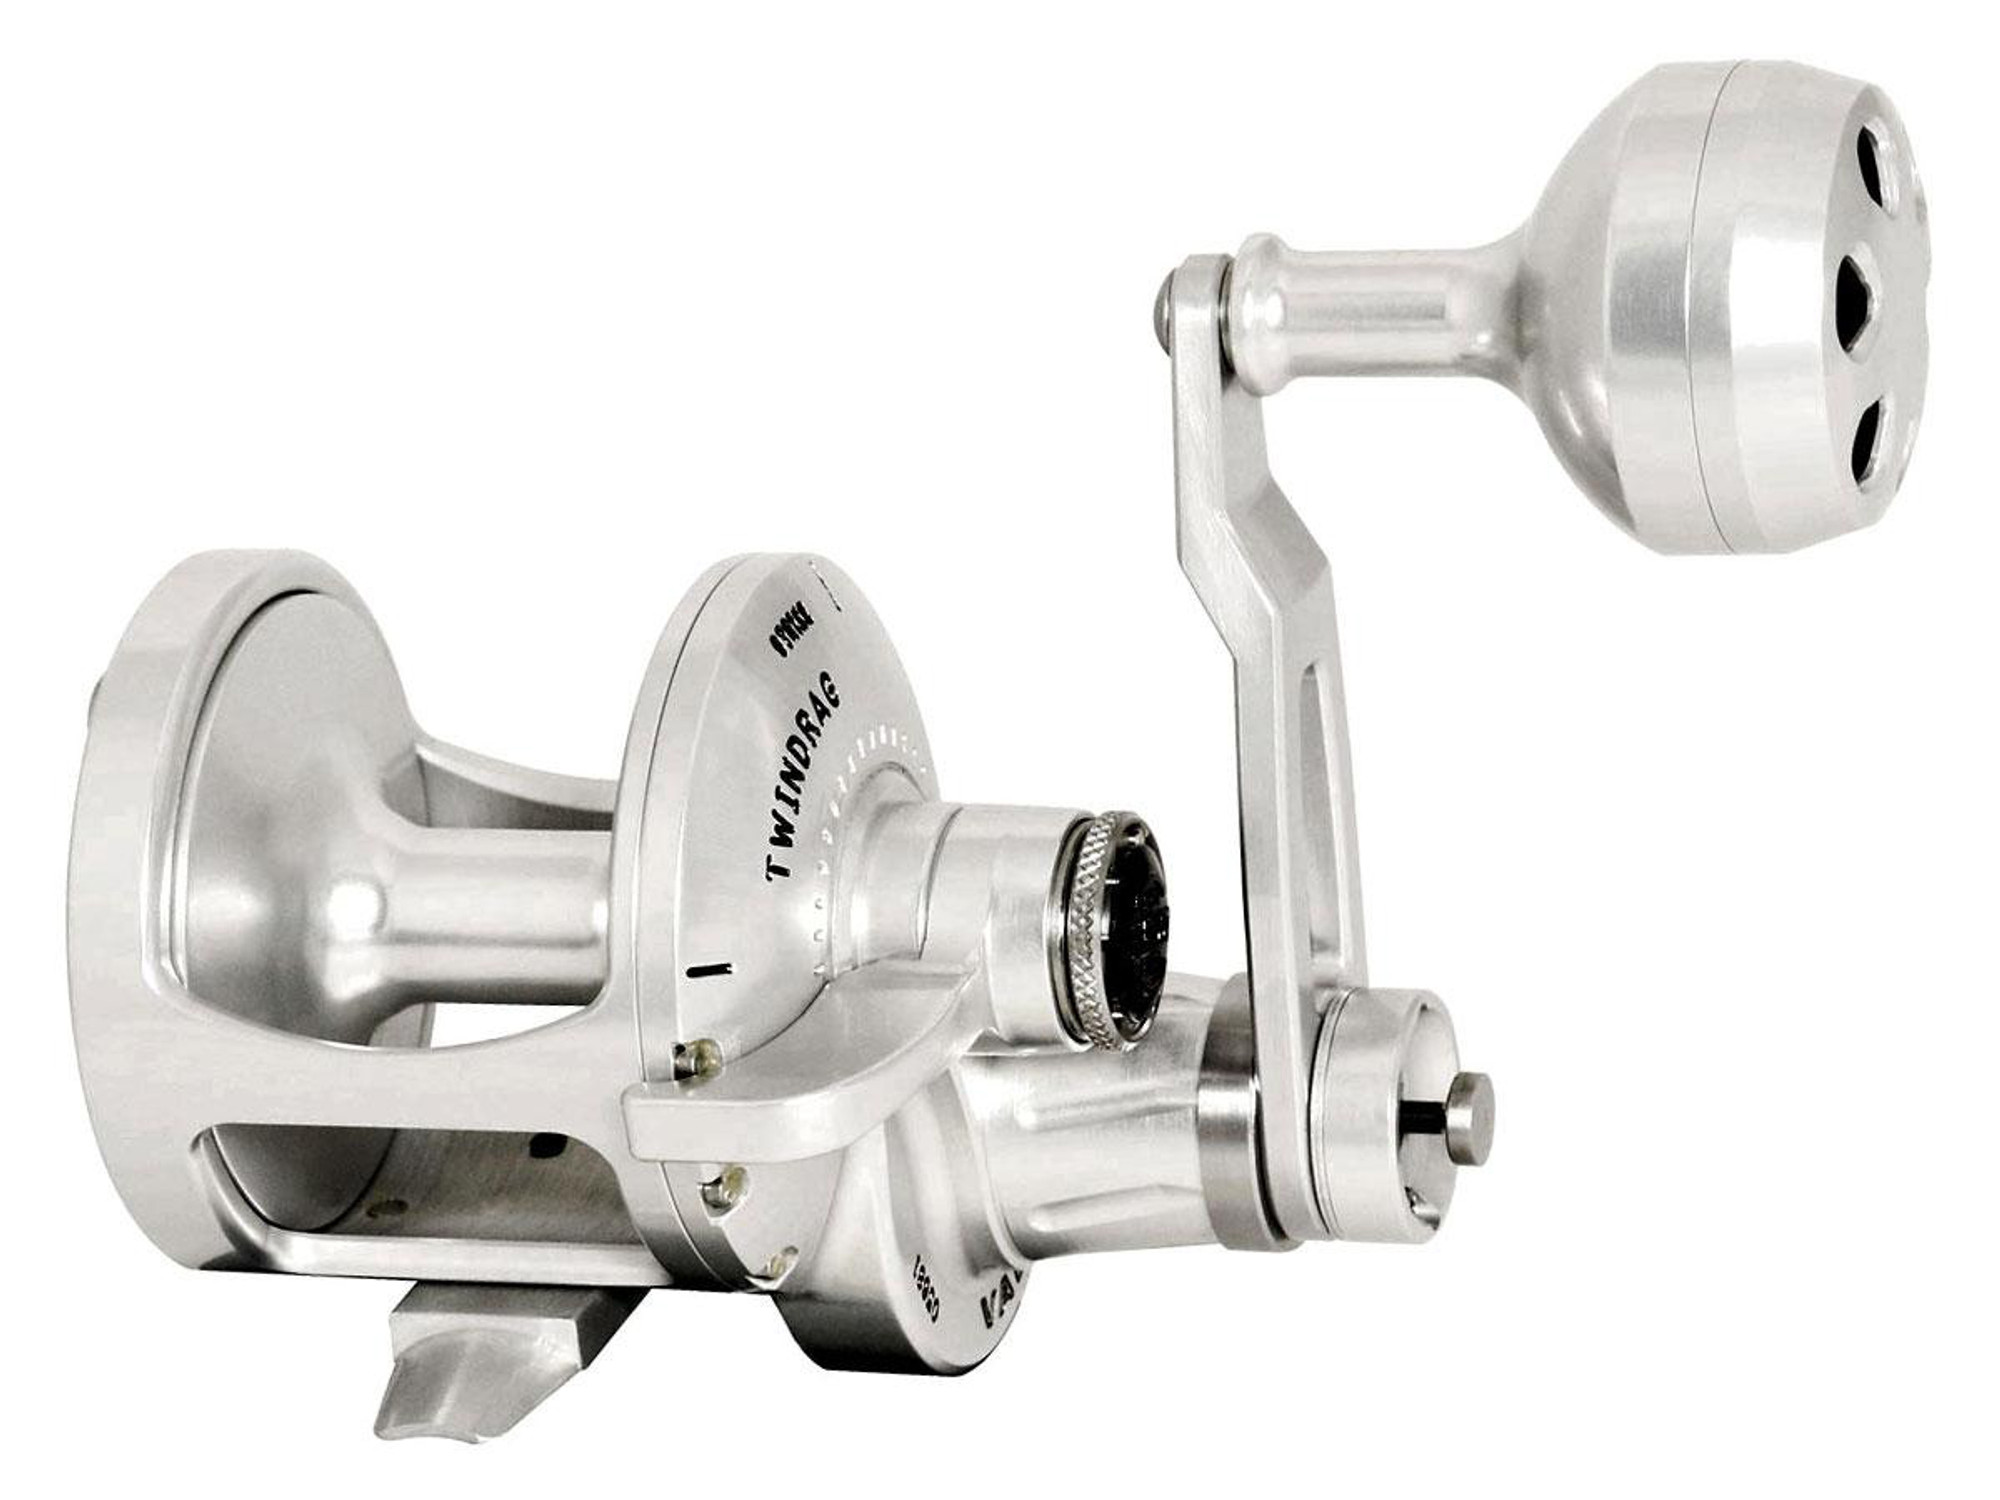 Accurate Fishing "Valiant" Series Two-Speed Fishing Reel (Size: 300 / Lefty / Silver)